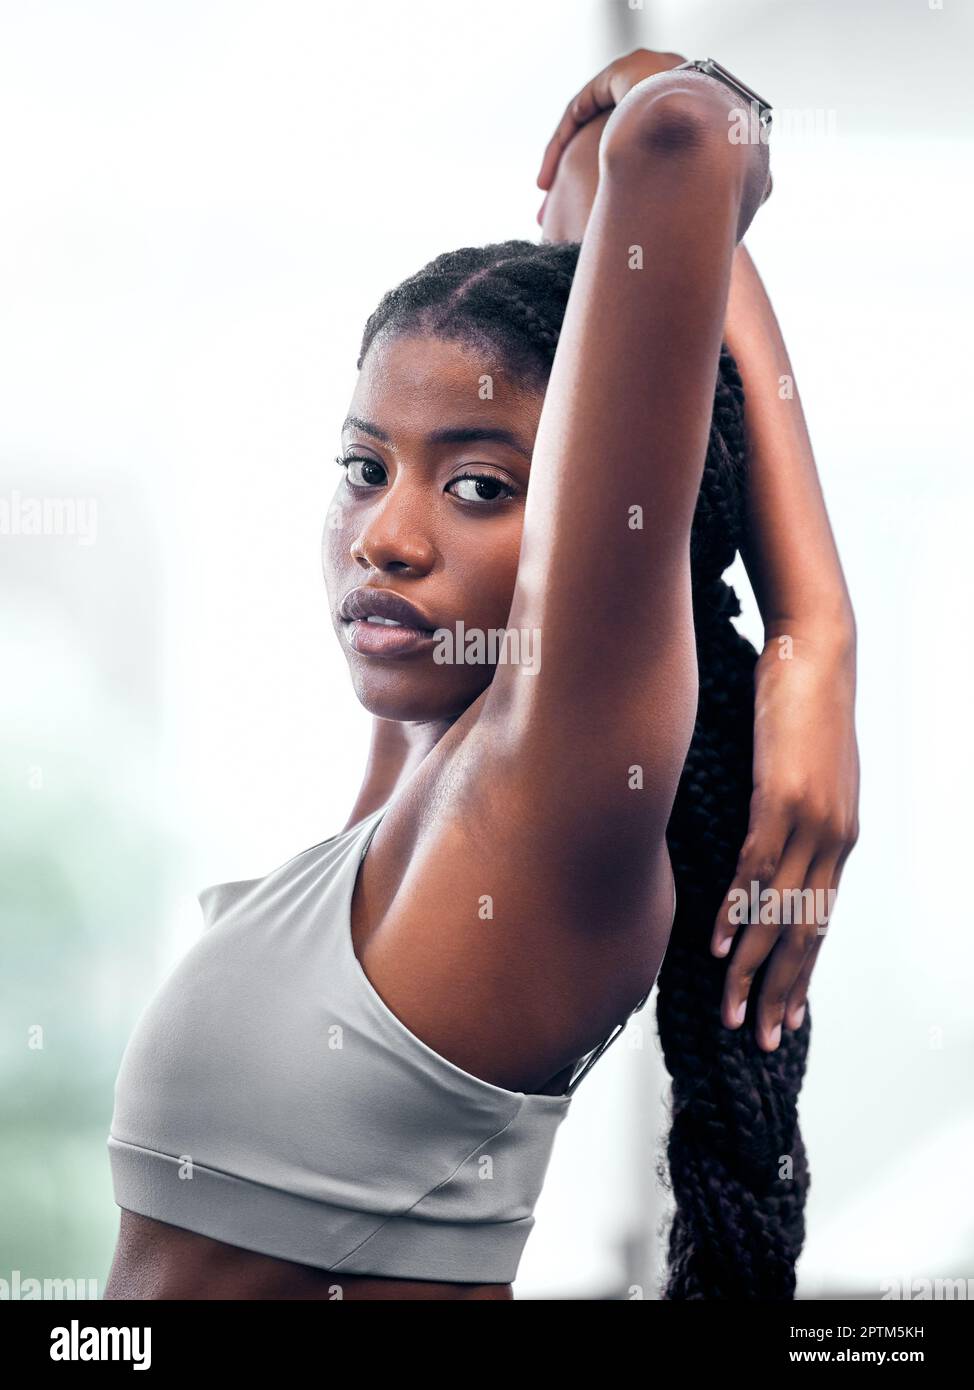 Workout, portrait and black woman stretching arm for self care